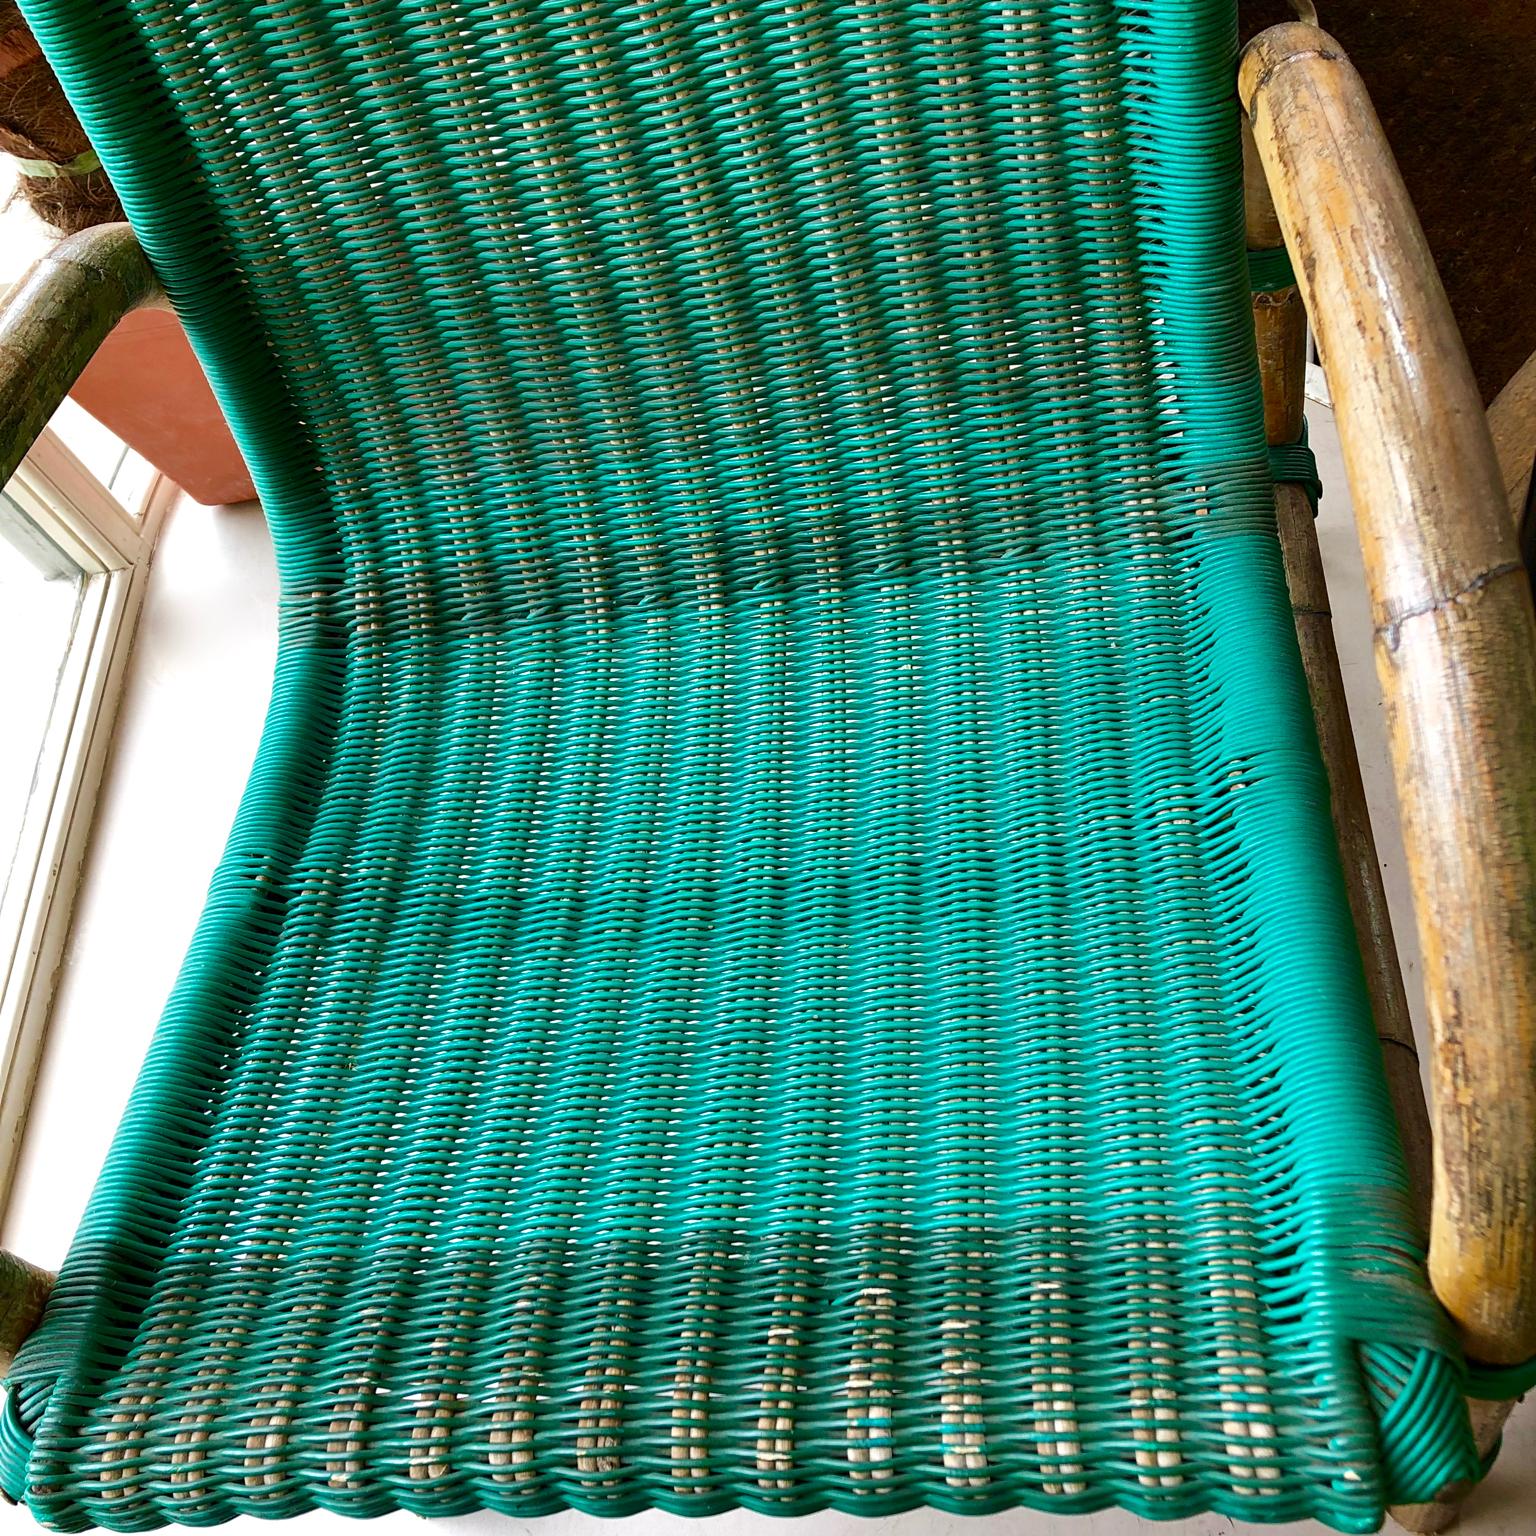 20th Century Bamboo Armchairs with Green Seats, circa 1960s, a Pair by Rotan, Torino